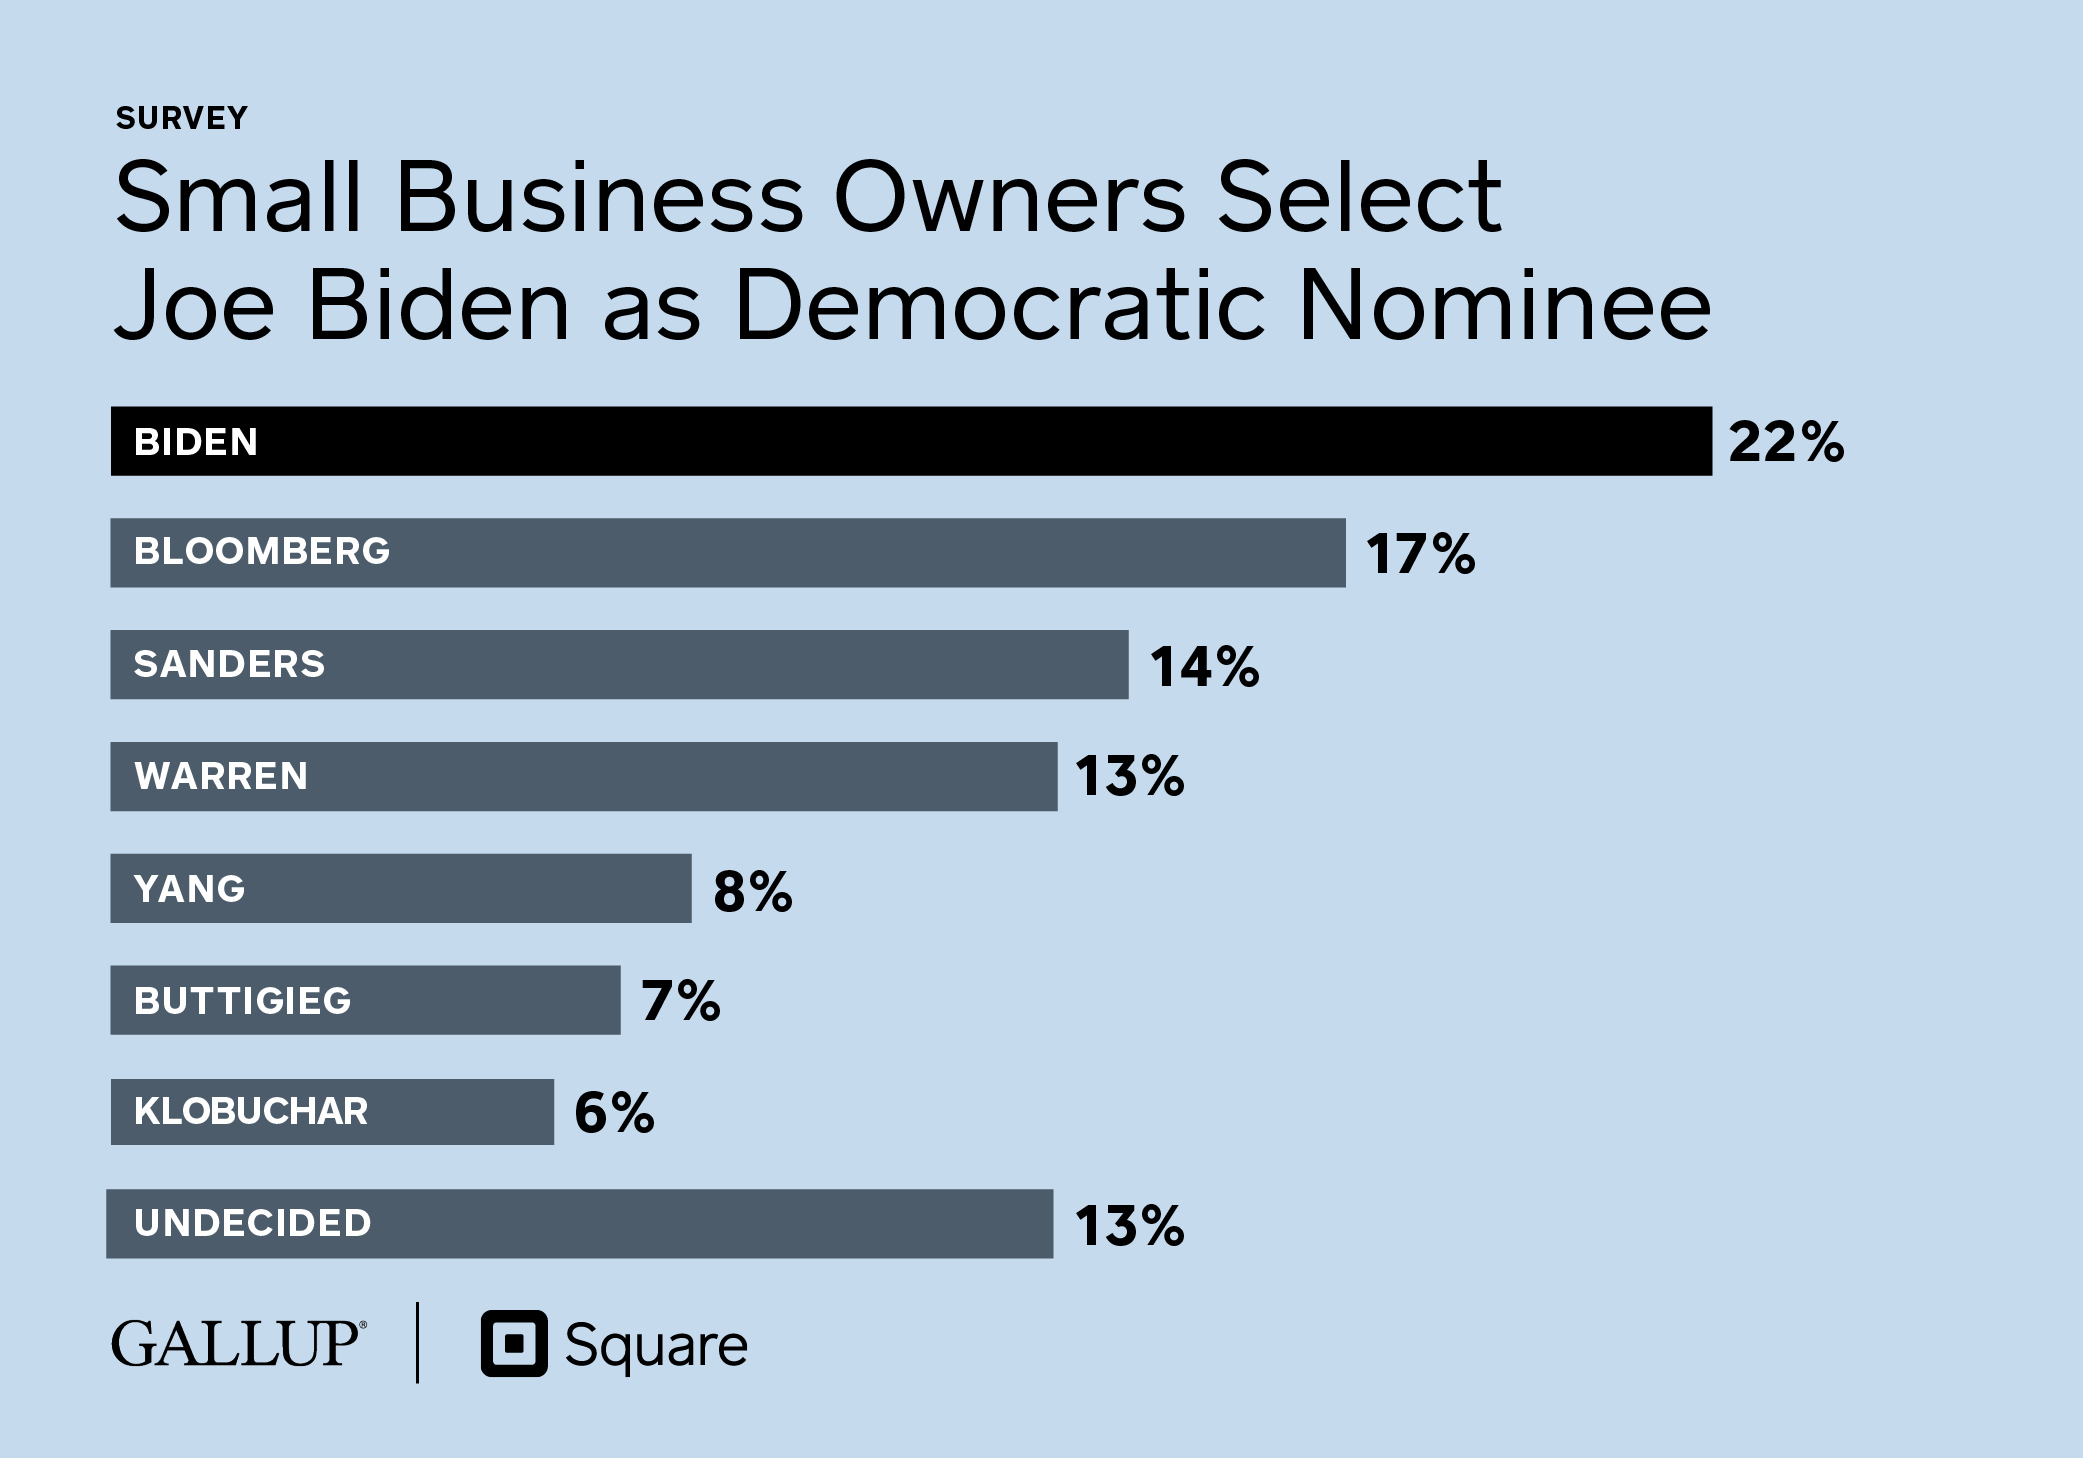 Small Business Owners Select Joe Biden as Democratic Nominee (Square/Gallup Survey)